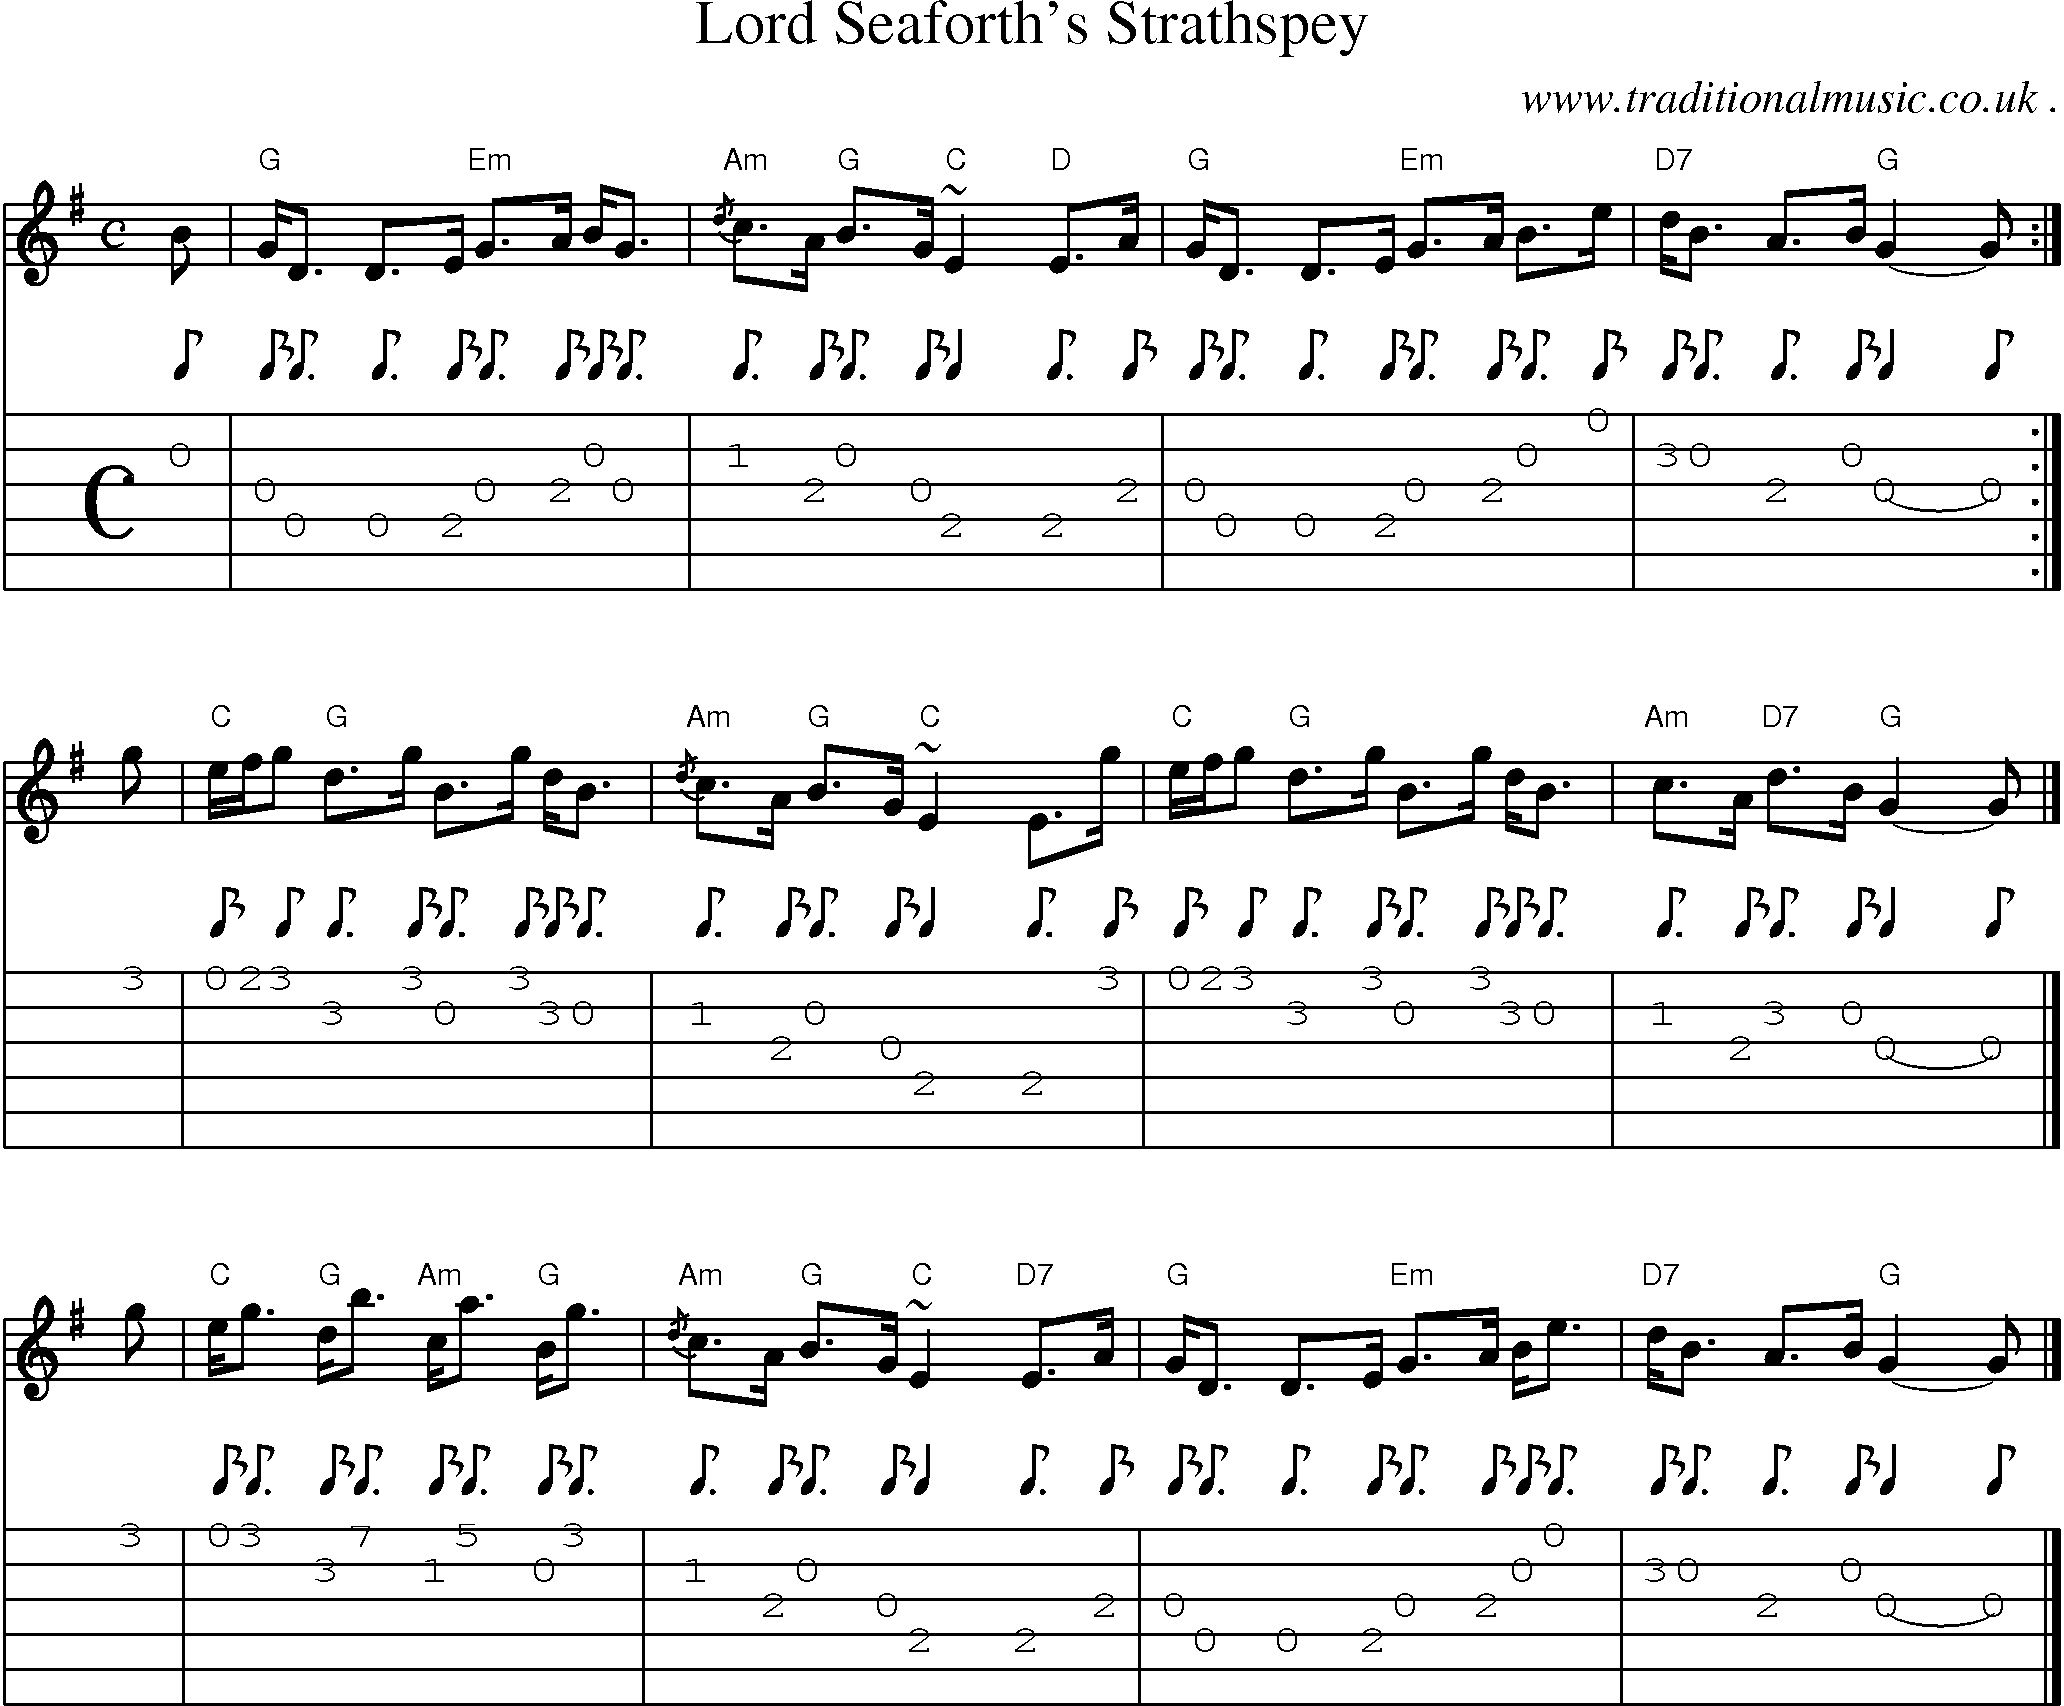 Sheet-music  score, Chords and Guitar Tabs for Lord Seaforths Strathspey